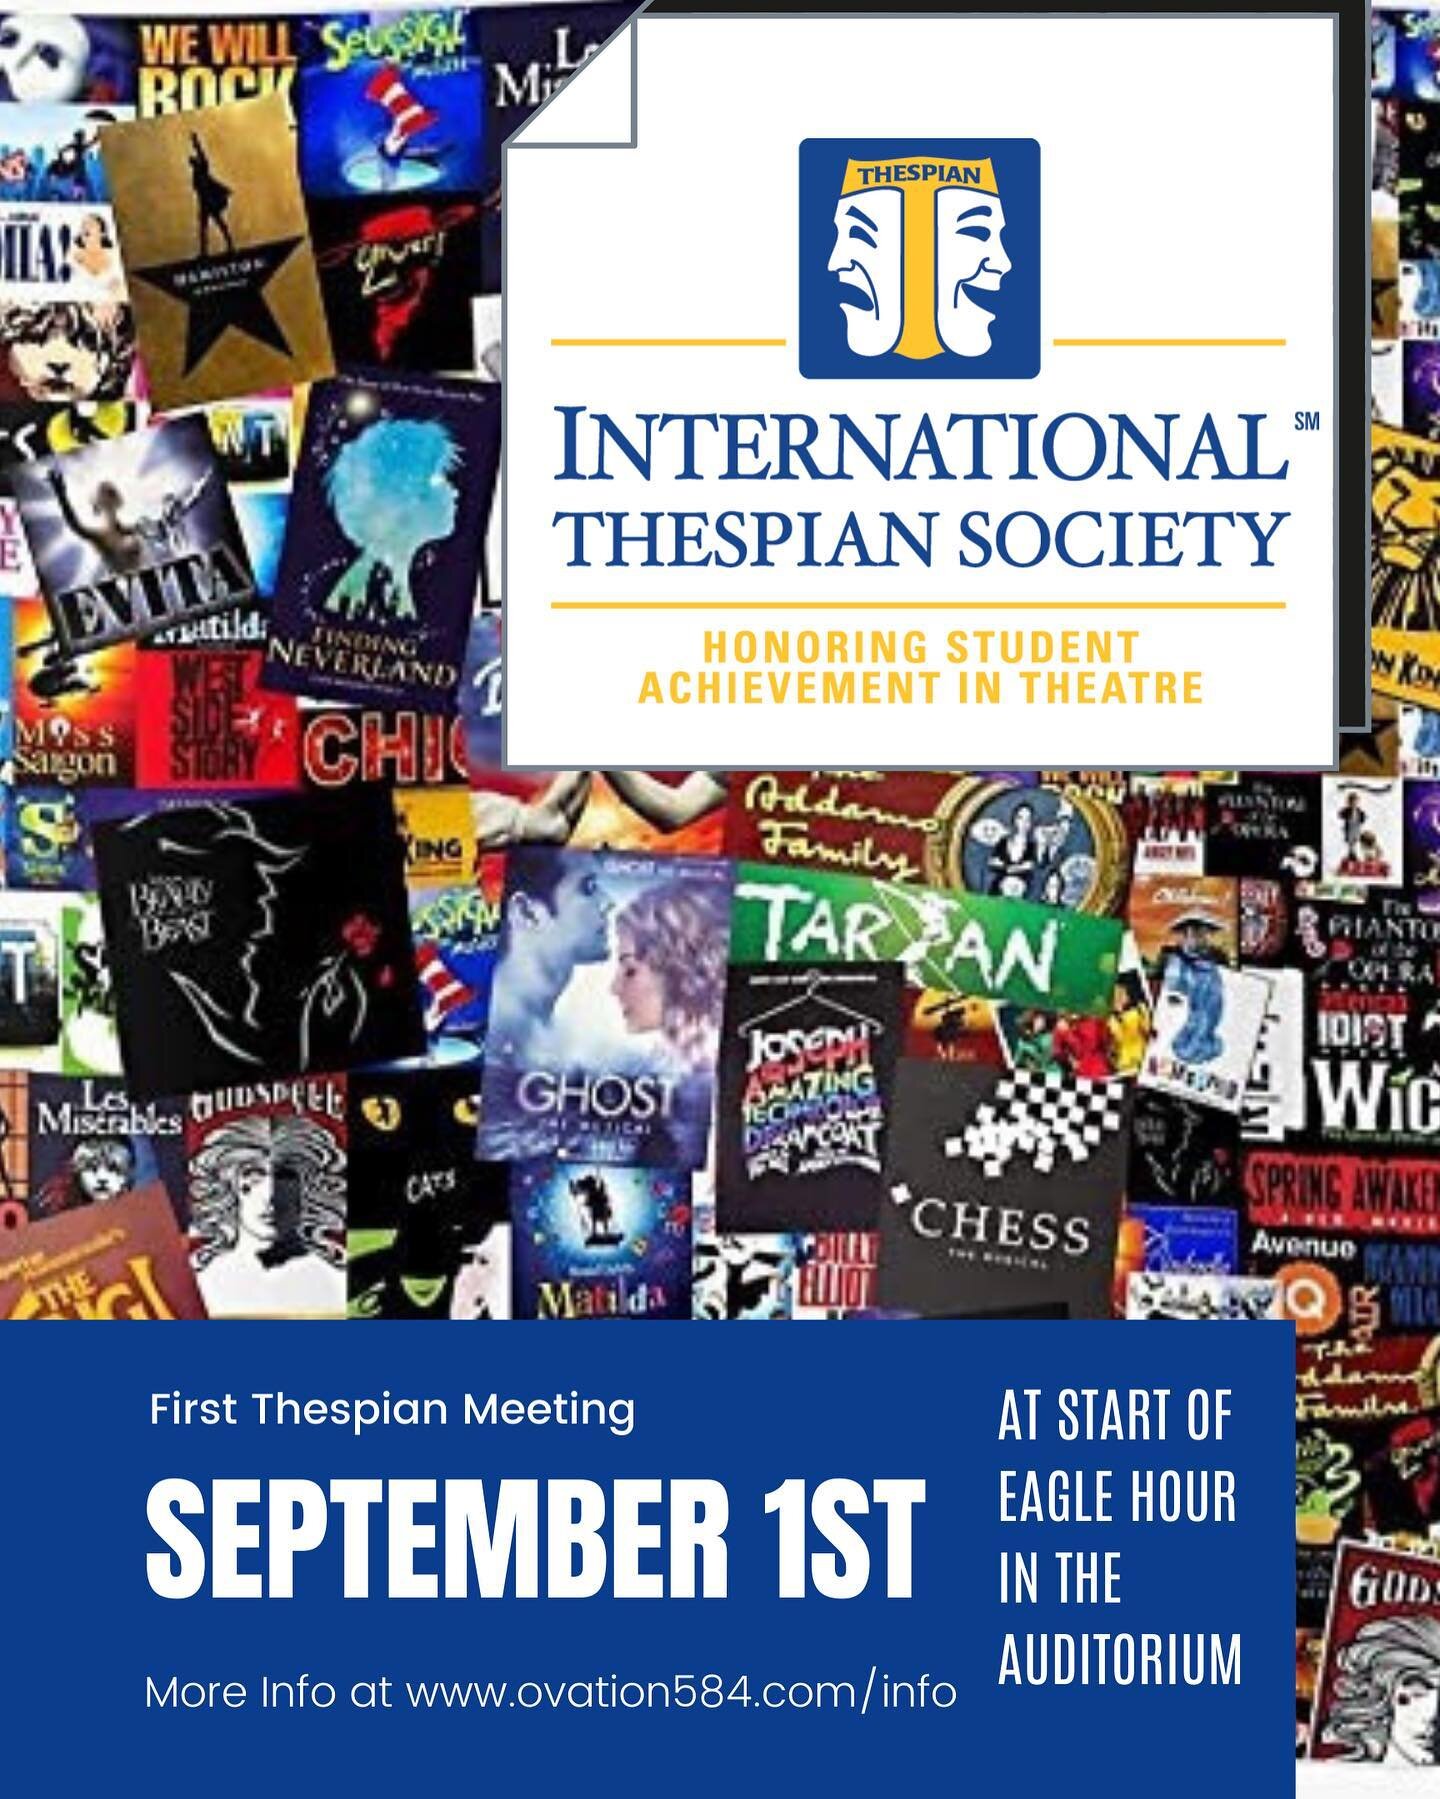 Come join us for the First International Thespian Society meeting of the year! At Start of Eagle hour in the Auditorium